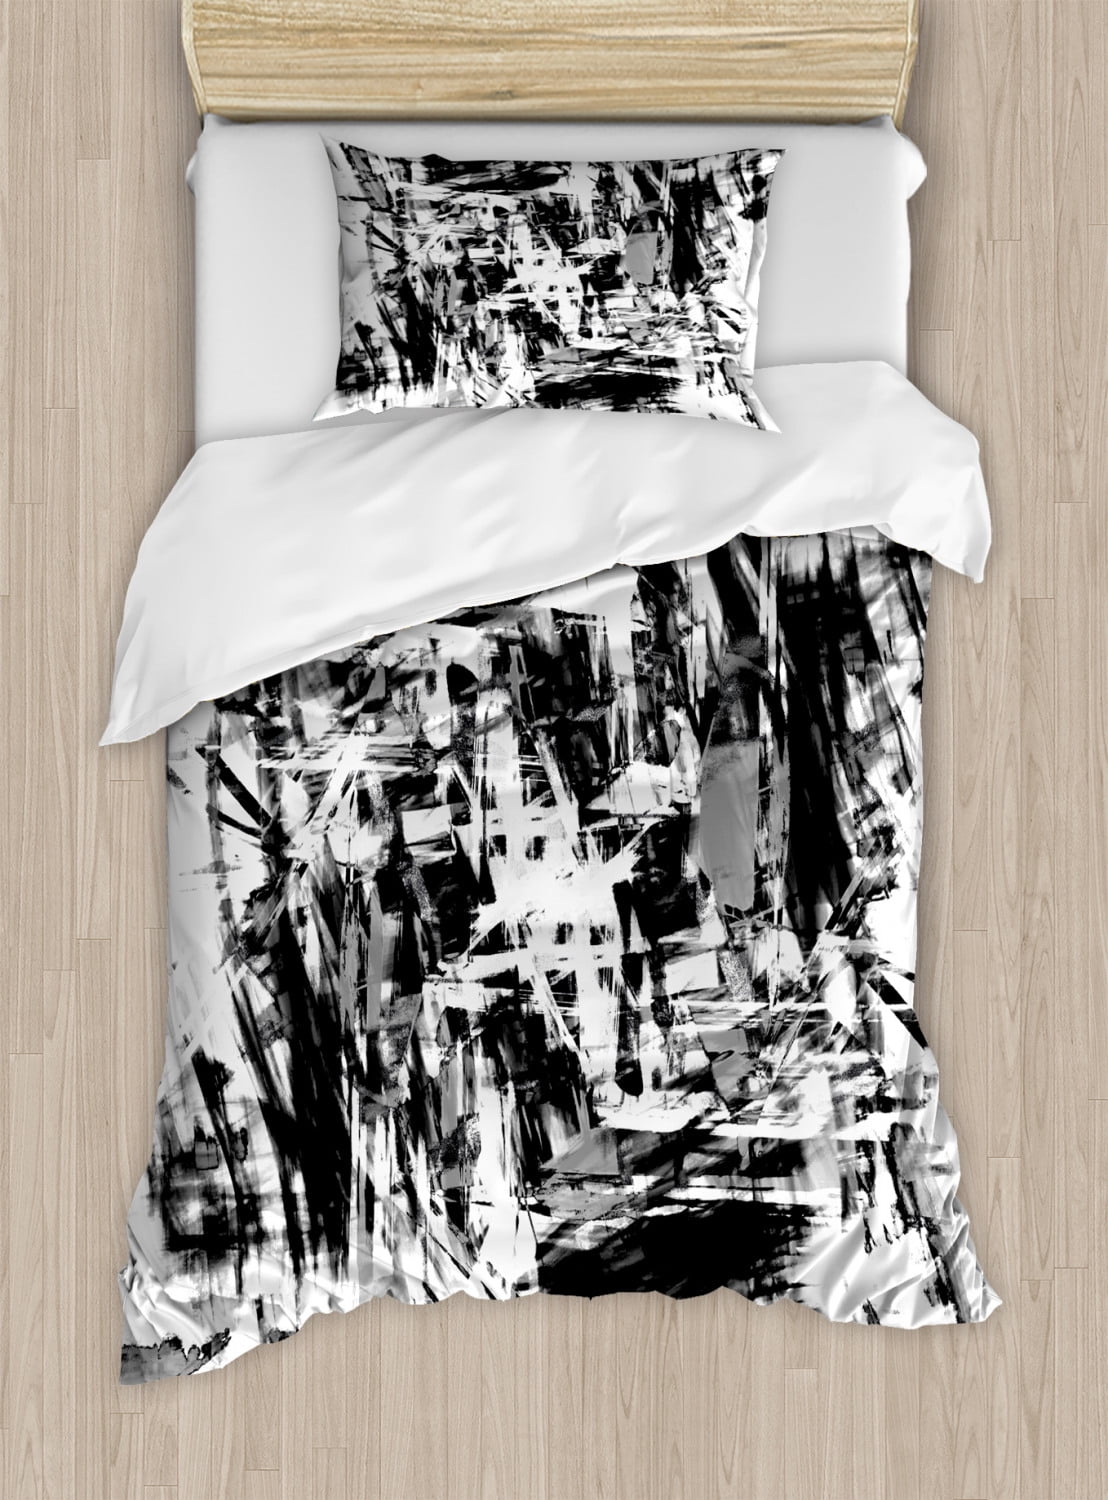 Black and White Duvet Cover Set Twin Queen King Sizes with Pillow Shams Bedding 